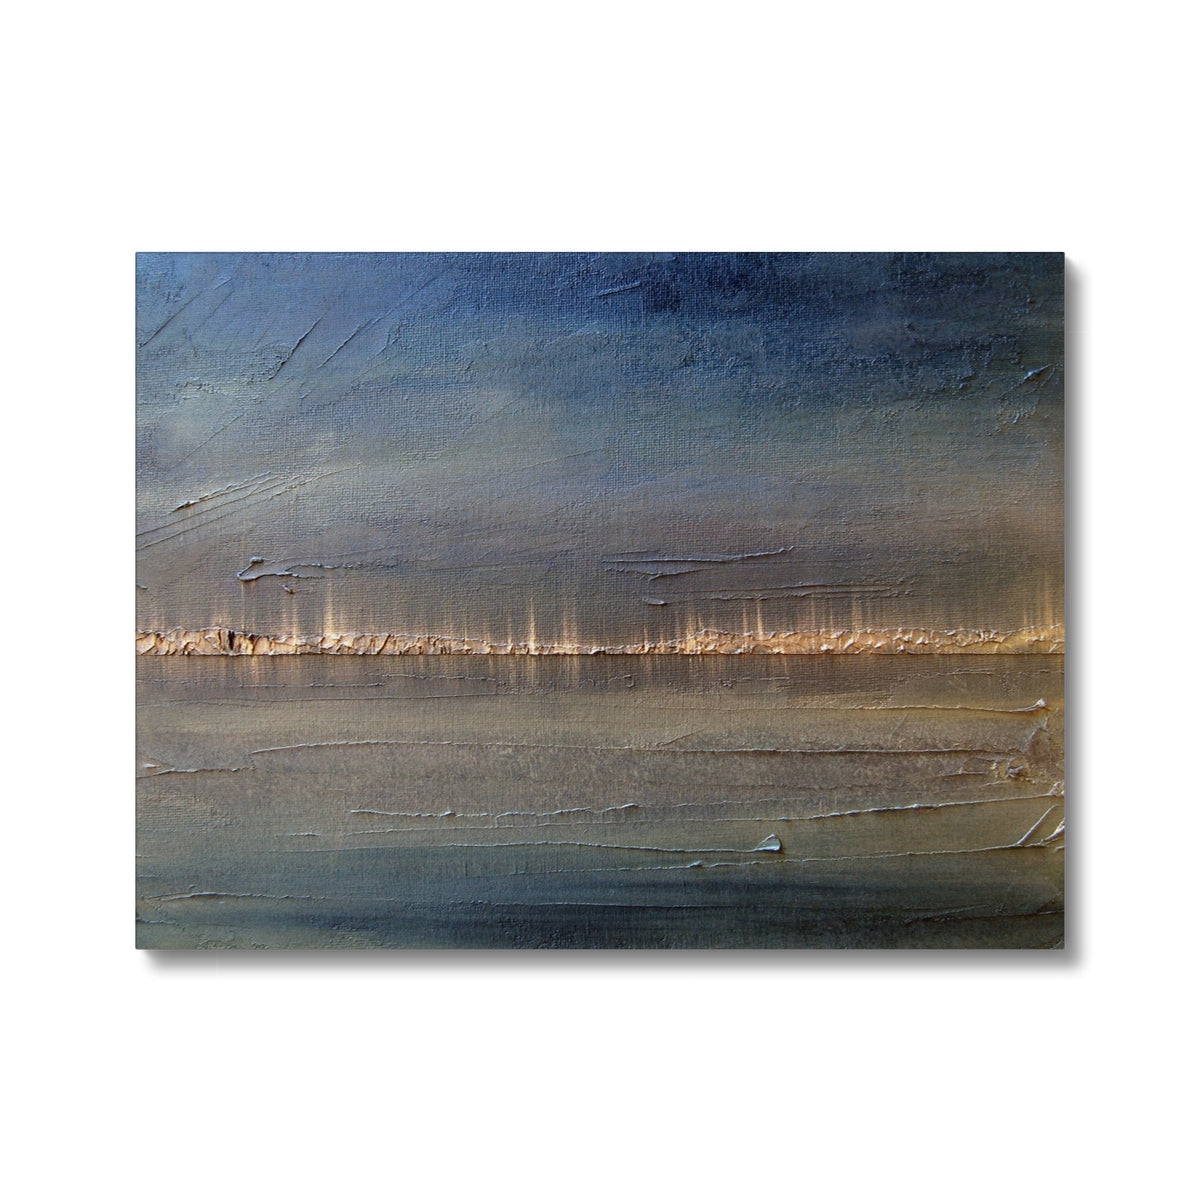 Distant Lights Lake Ontario Painting | Canvas From Scotland-Contemporary Stretched Canvas Prints-World Art Gallery-24"x18"-Paintings, Prints, Homeware, Art Gifts From Scotland By Scottish Artist Kevin Hunter